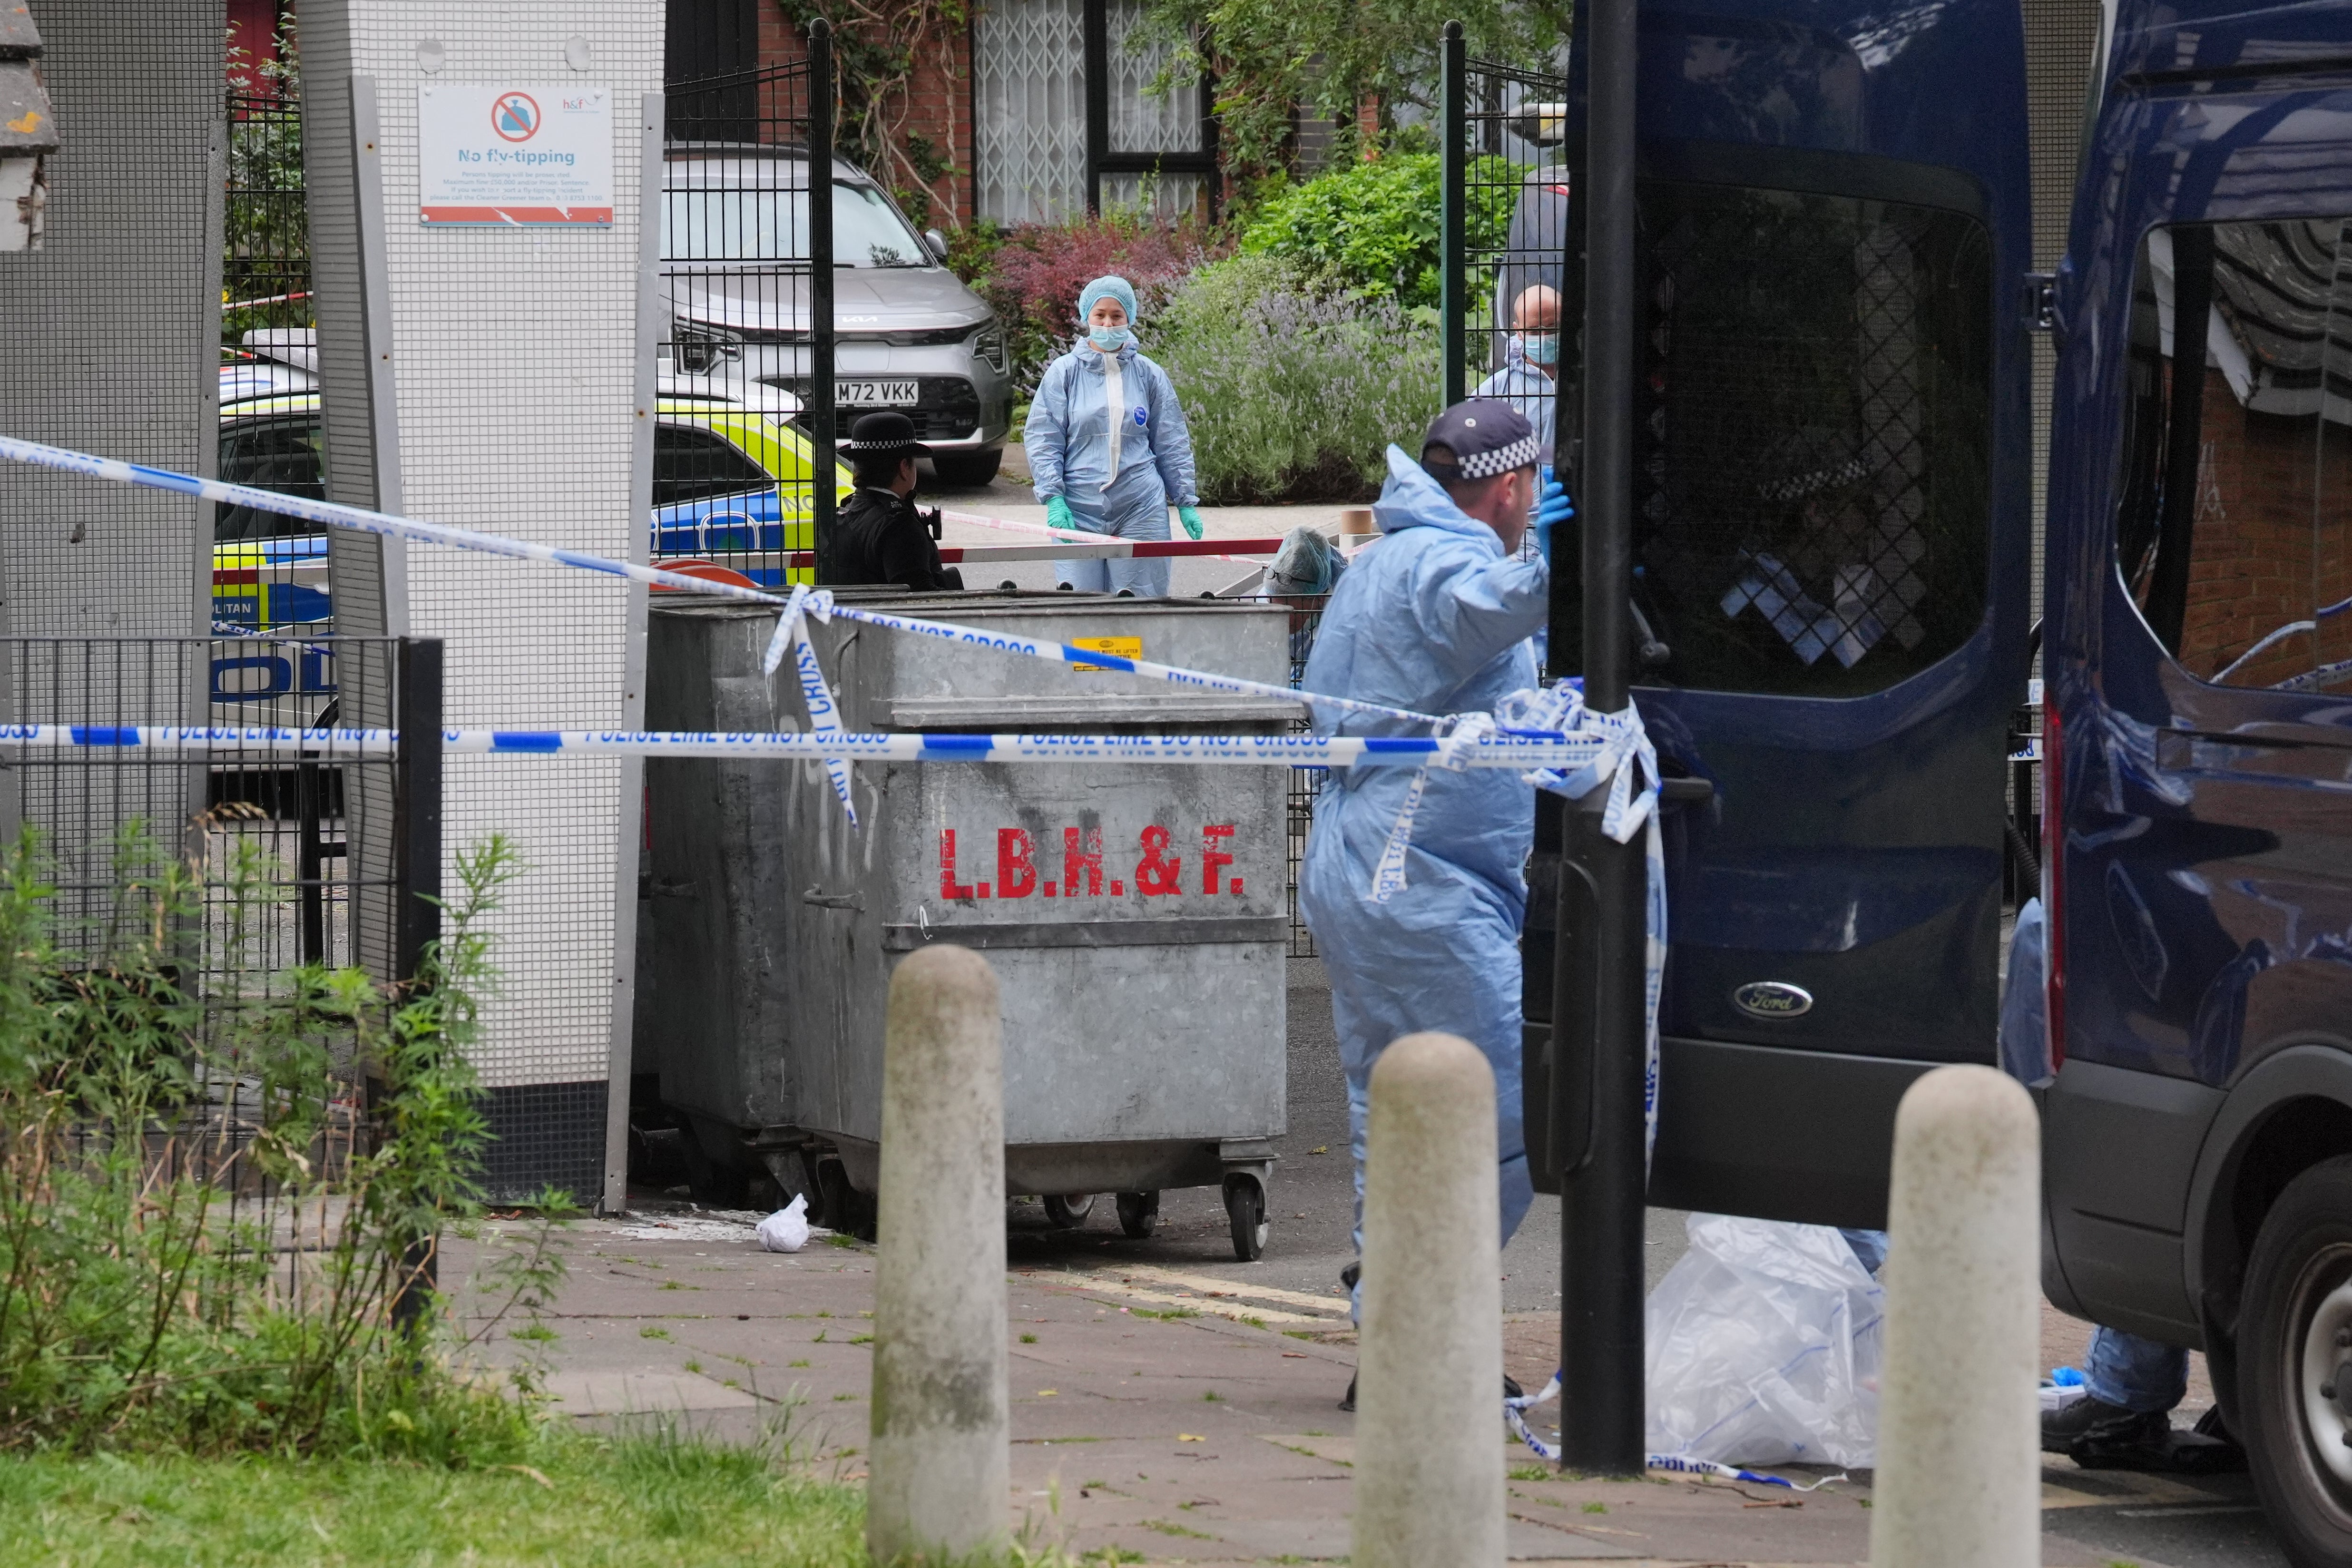 Forensic officers in Shepherd's Bush, west London on Saturday, after human remains were found in two suitcases near the Clifton Suspension Bridge in Bristol.